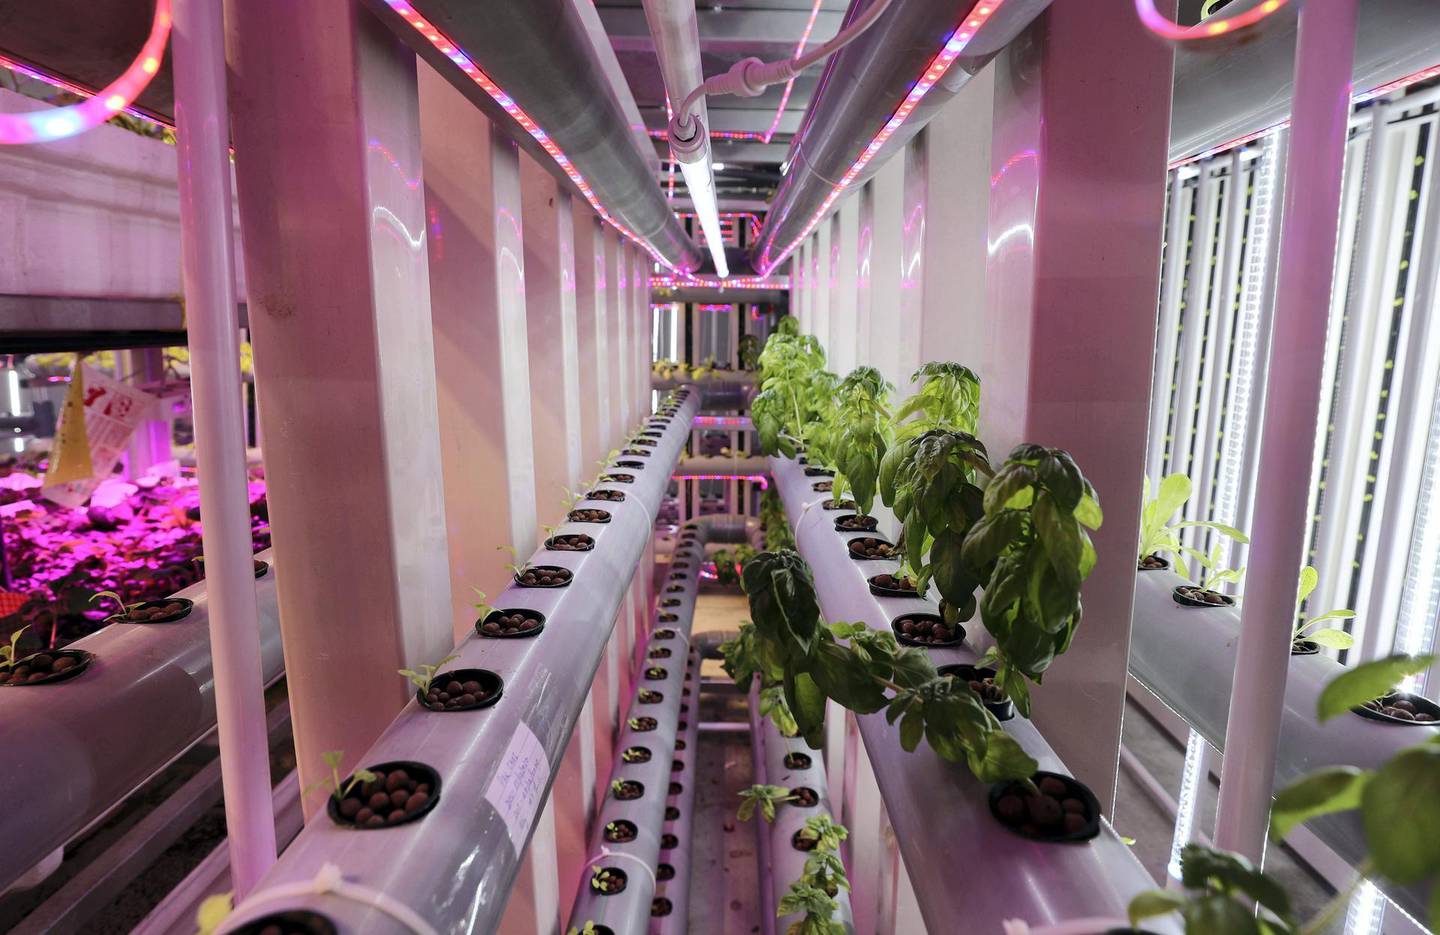 Sharjah, United Arab Emirates - Reporter: Nick Webster. News. A grow tunnel at the Eco-green technologies research site at Sharjah Research Technology and Innovation Park. Sharjah. Wednesday, January 6th, 2021. Chris Whiteoak / The National